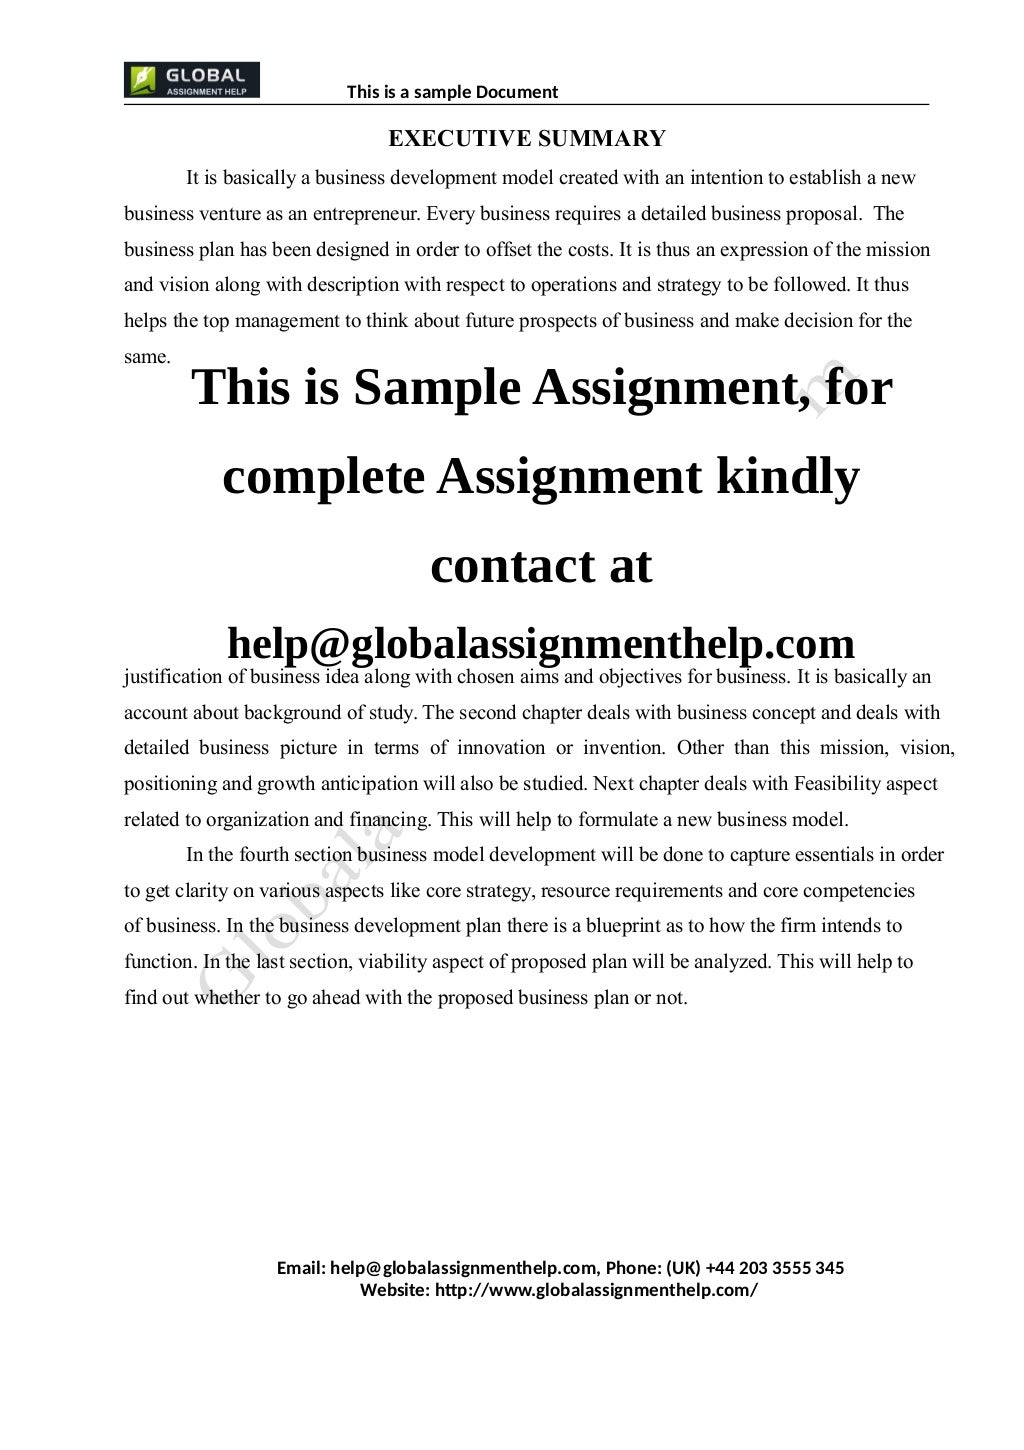 business plan sample for assignment pdf